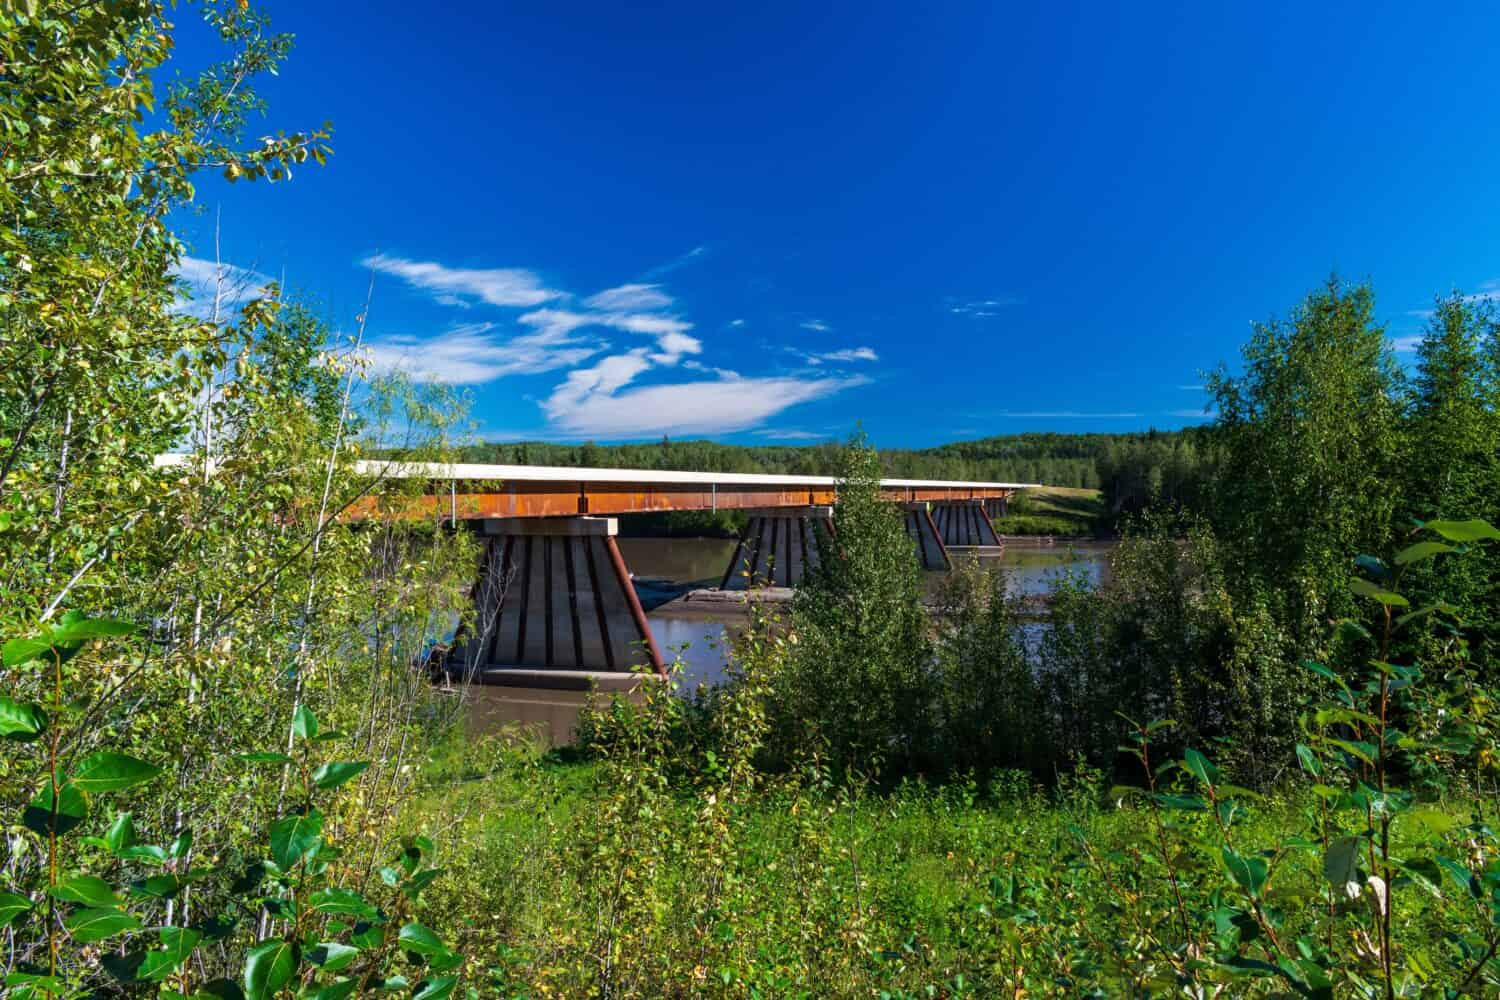 Fort Nelson River Bridge crosses the Fort Nelson River in Northern British Columbia, BC Canada